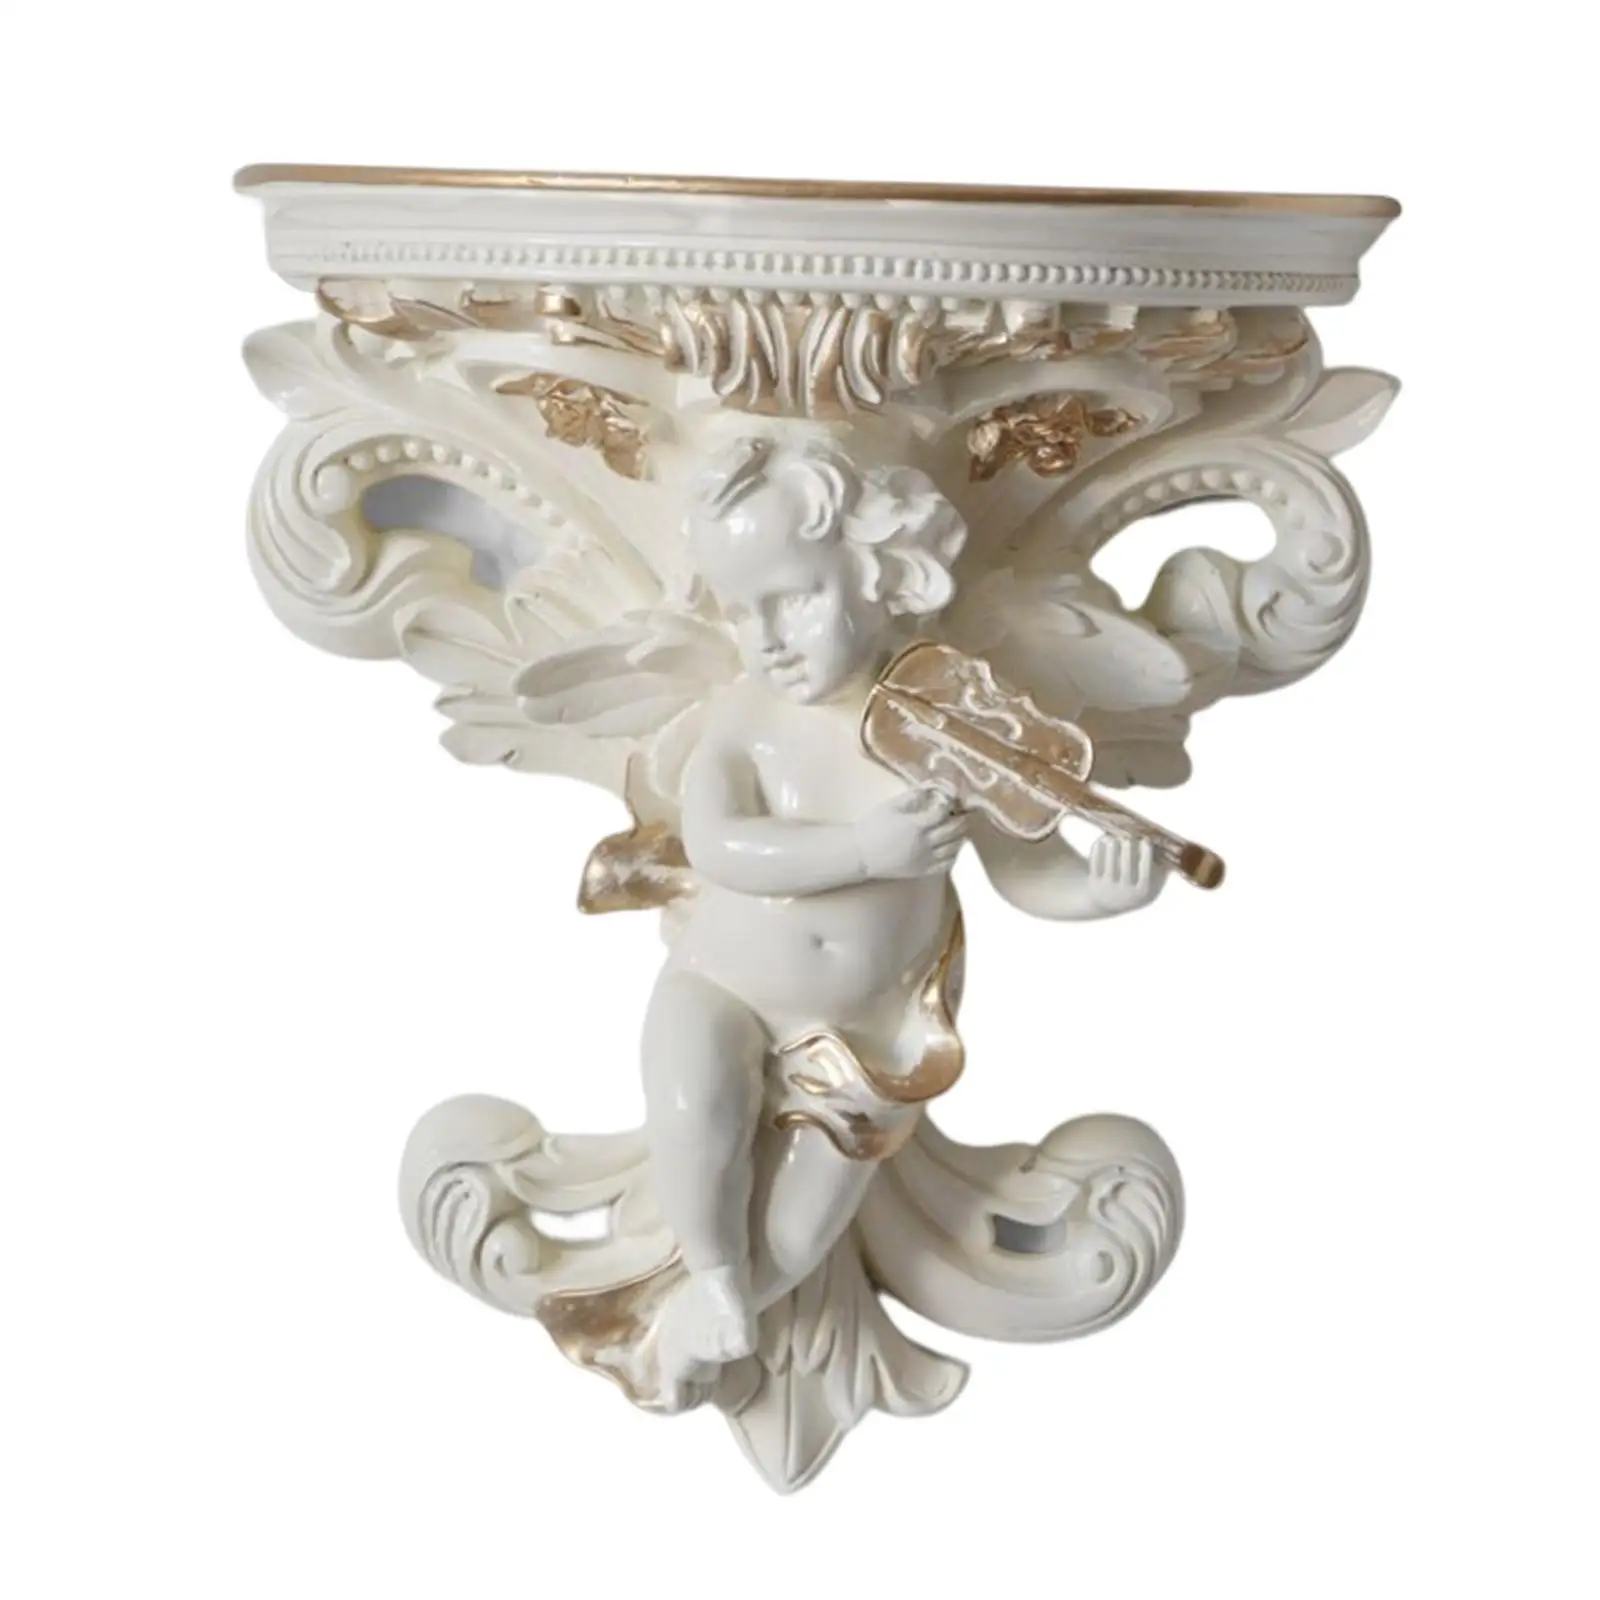 European Wall Floating Shelf Angel Statue Display Decoration wall Mount Resin for Home wall Decoration Bathroom